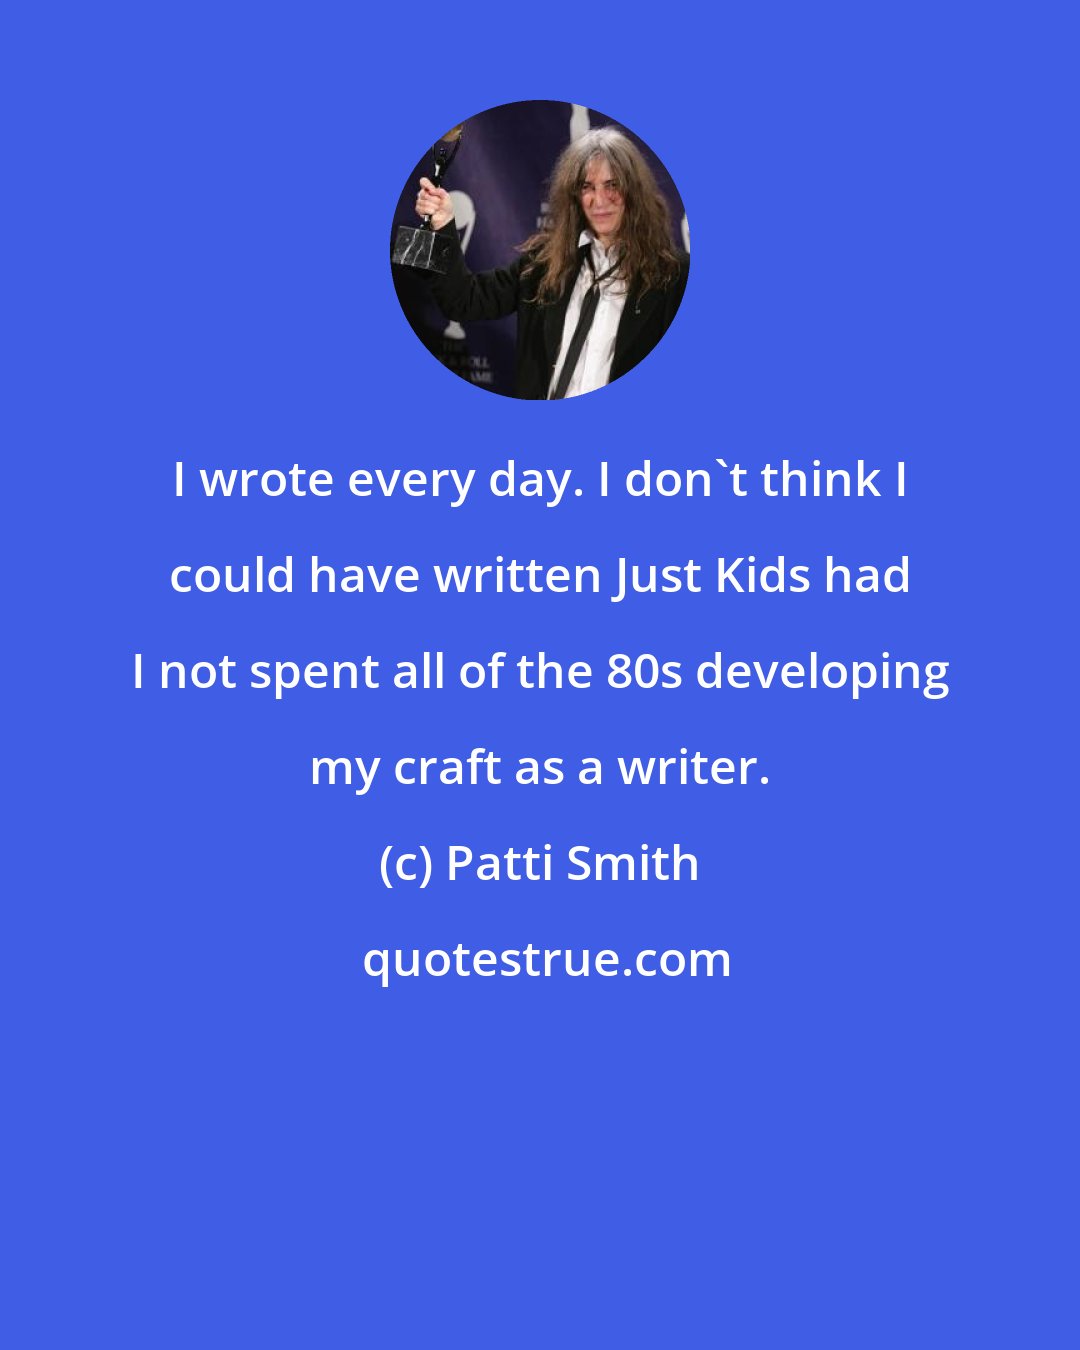 Patti Smith: I wrote every day. I don't think I could have written Just Kids had I not spent all of the 80s developing my craft as a writer.